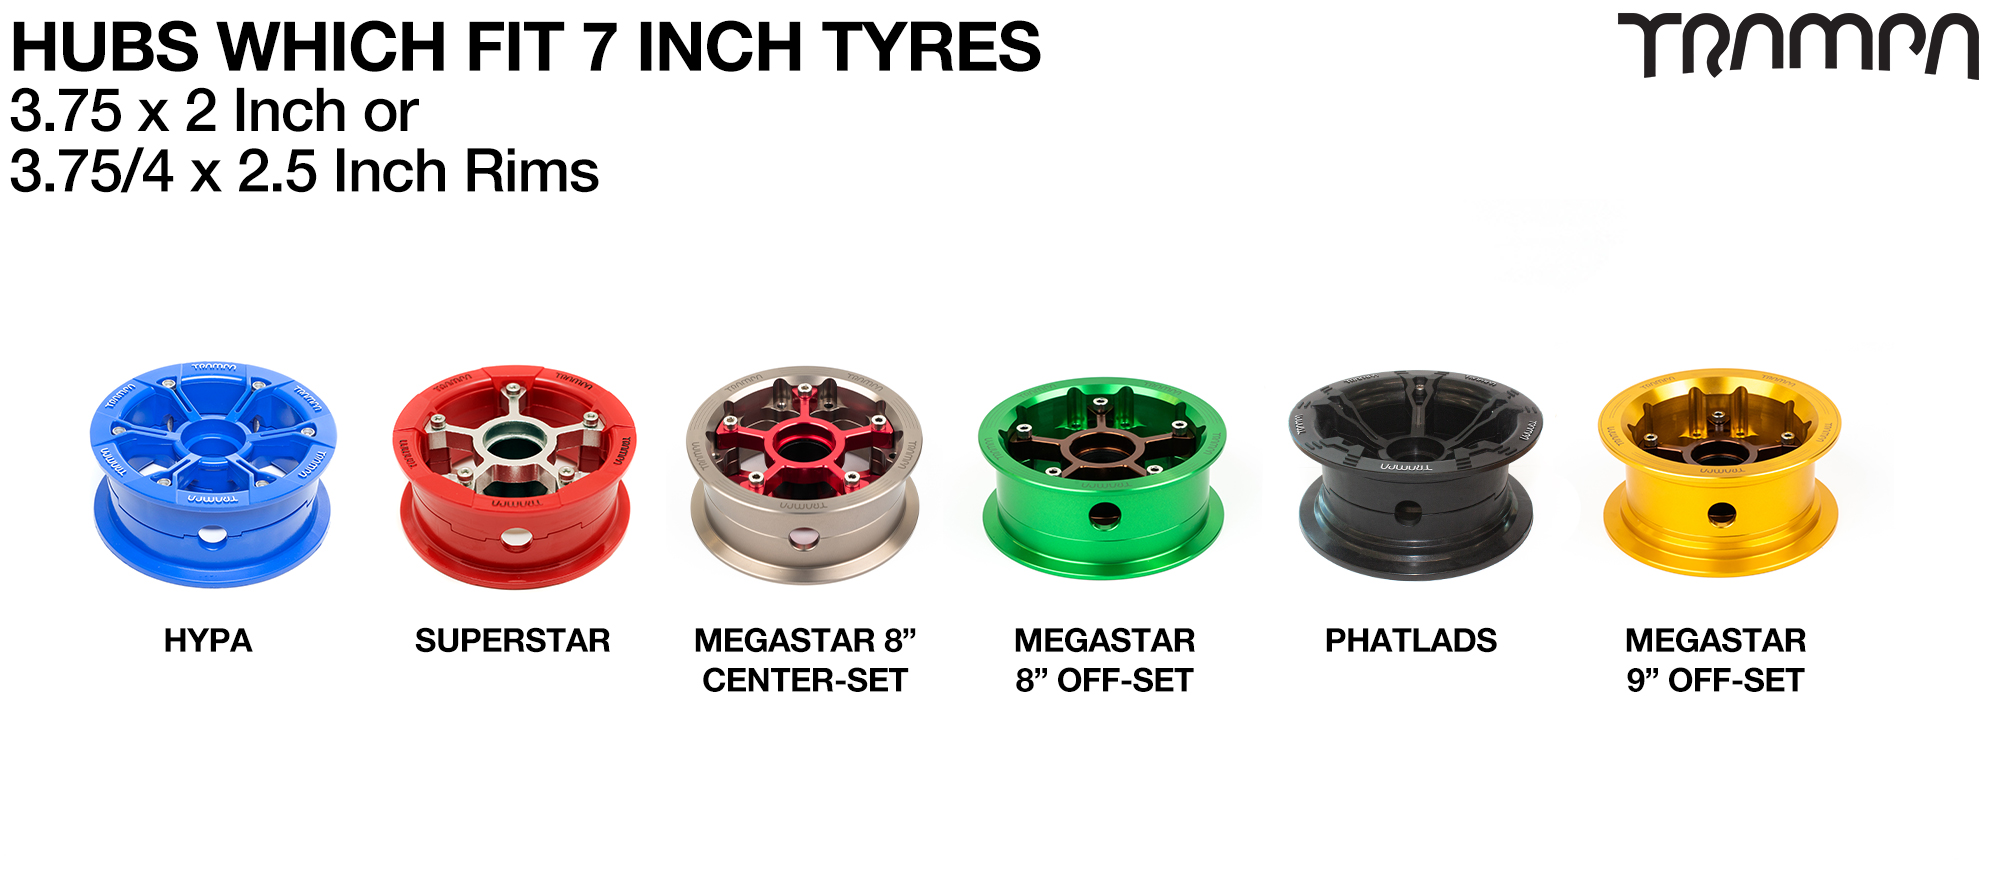 INNOVA INLINE 7 Inch Tyre measures 3.75x 1.75x 7 Inch or 175x 45mm with 3.75 inch Rim & fits all 3.75 inch Hubs - BLACK